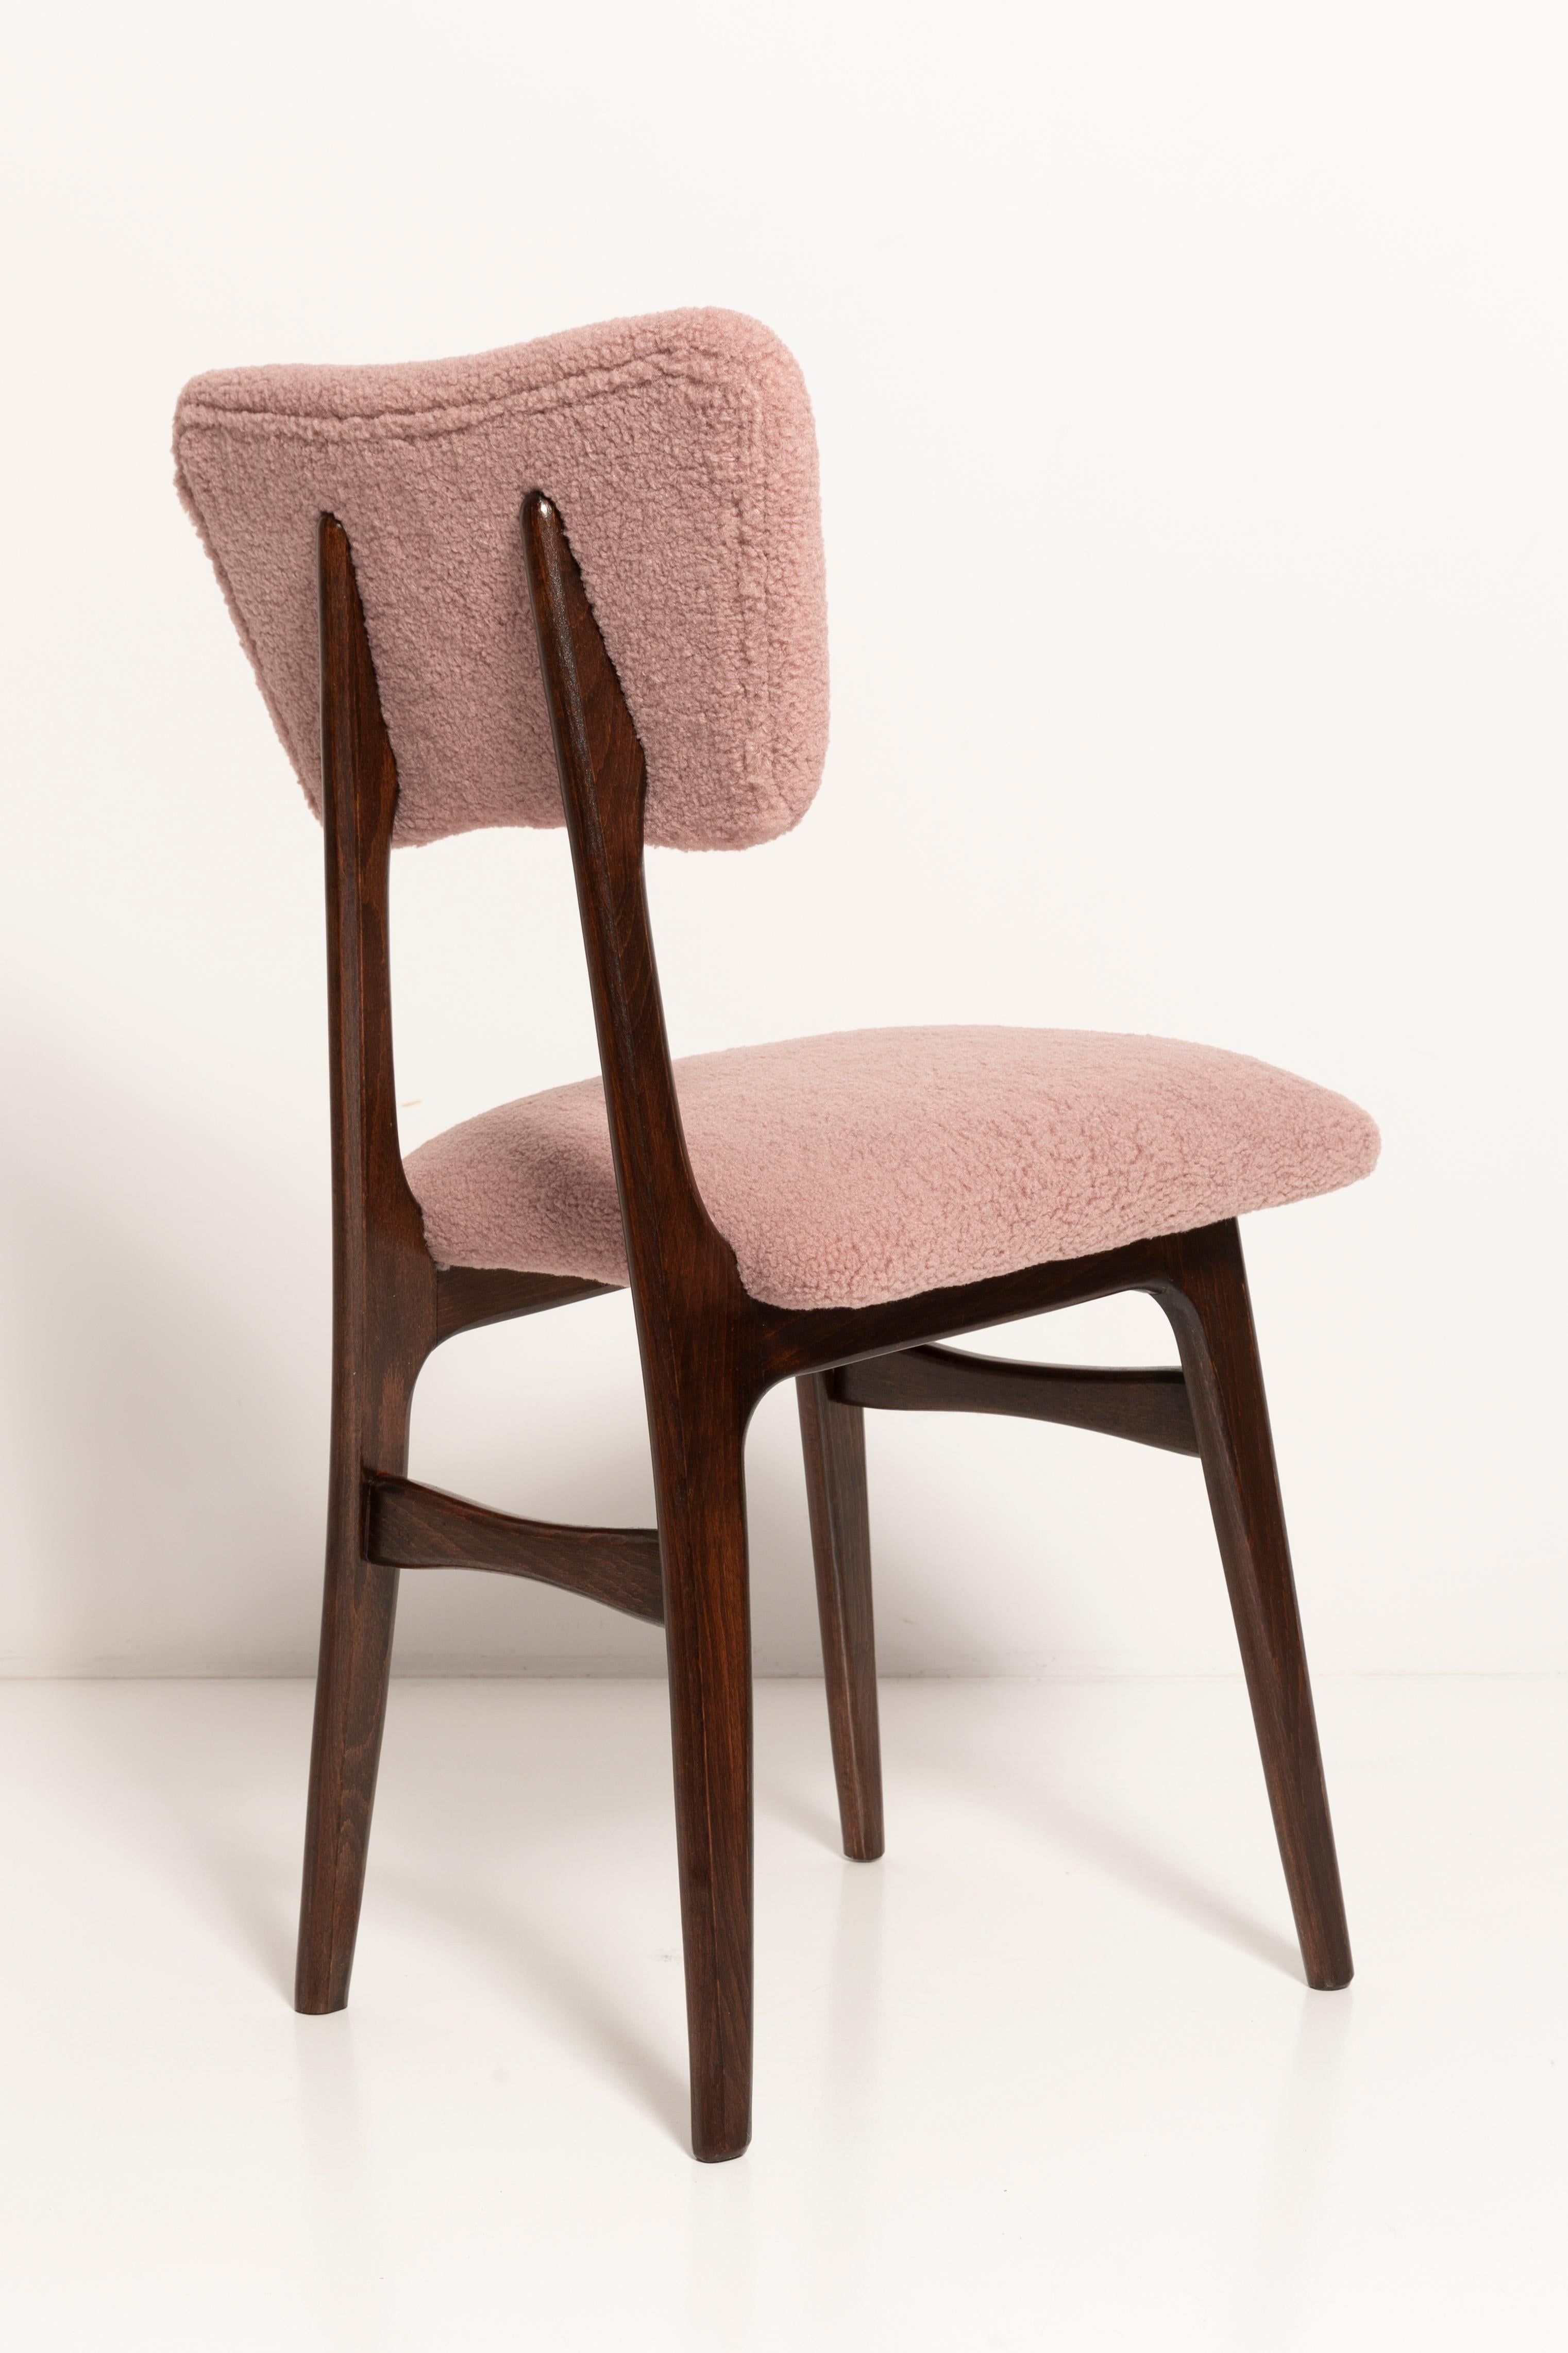 20th Century Mid Century Butterfly Dining Chair, Pink Boucle, Europe, 1960s For Sale